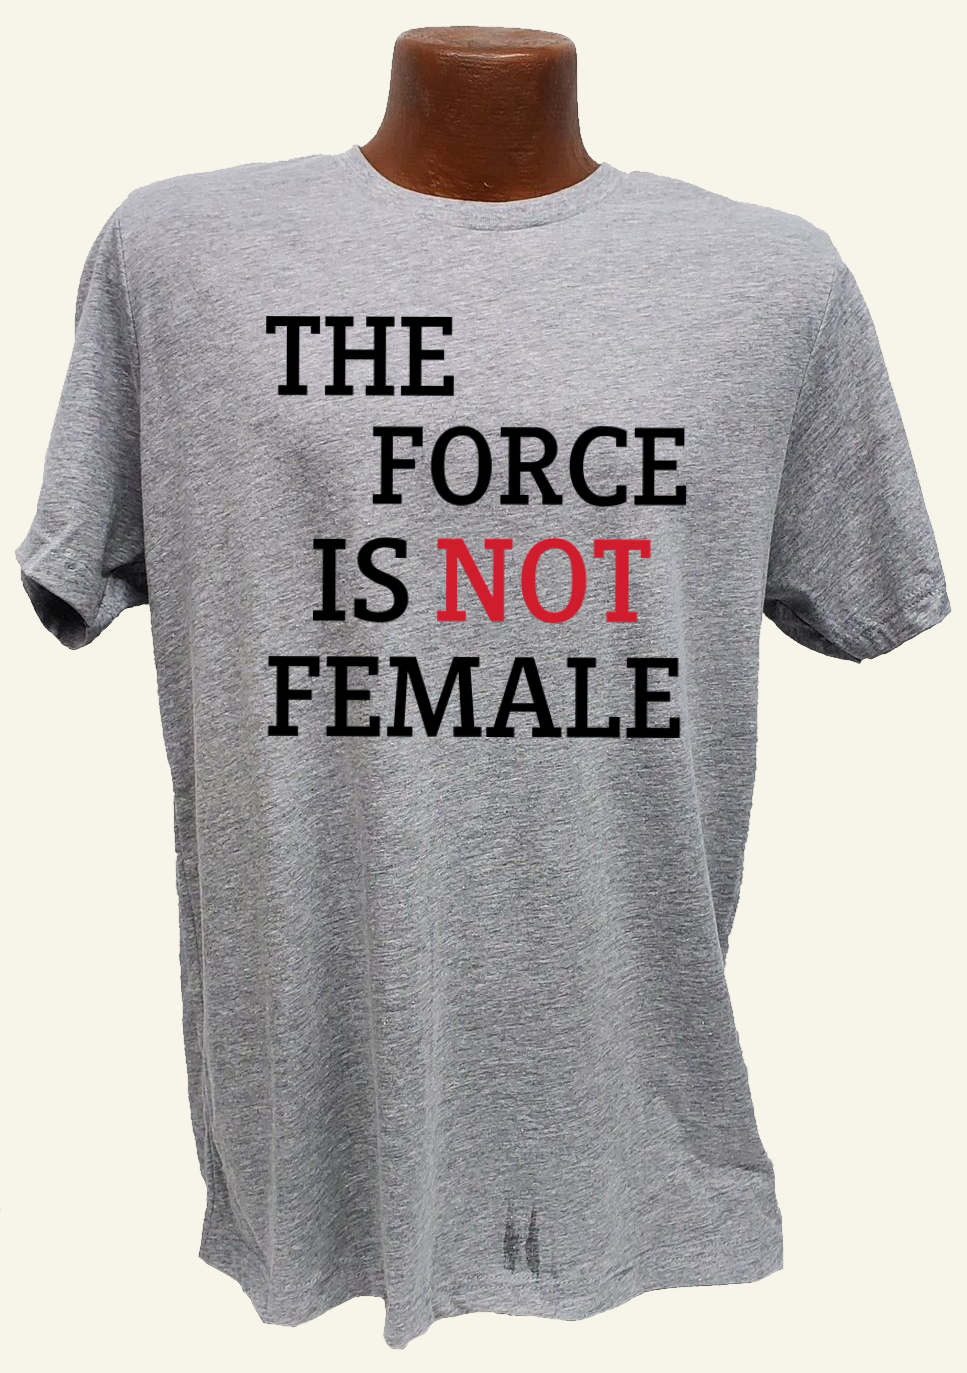 The Force Is Not Female Tee